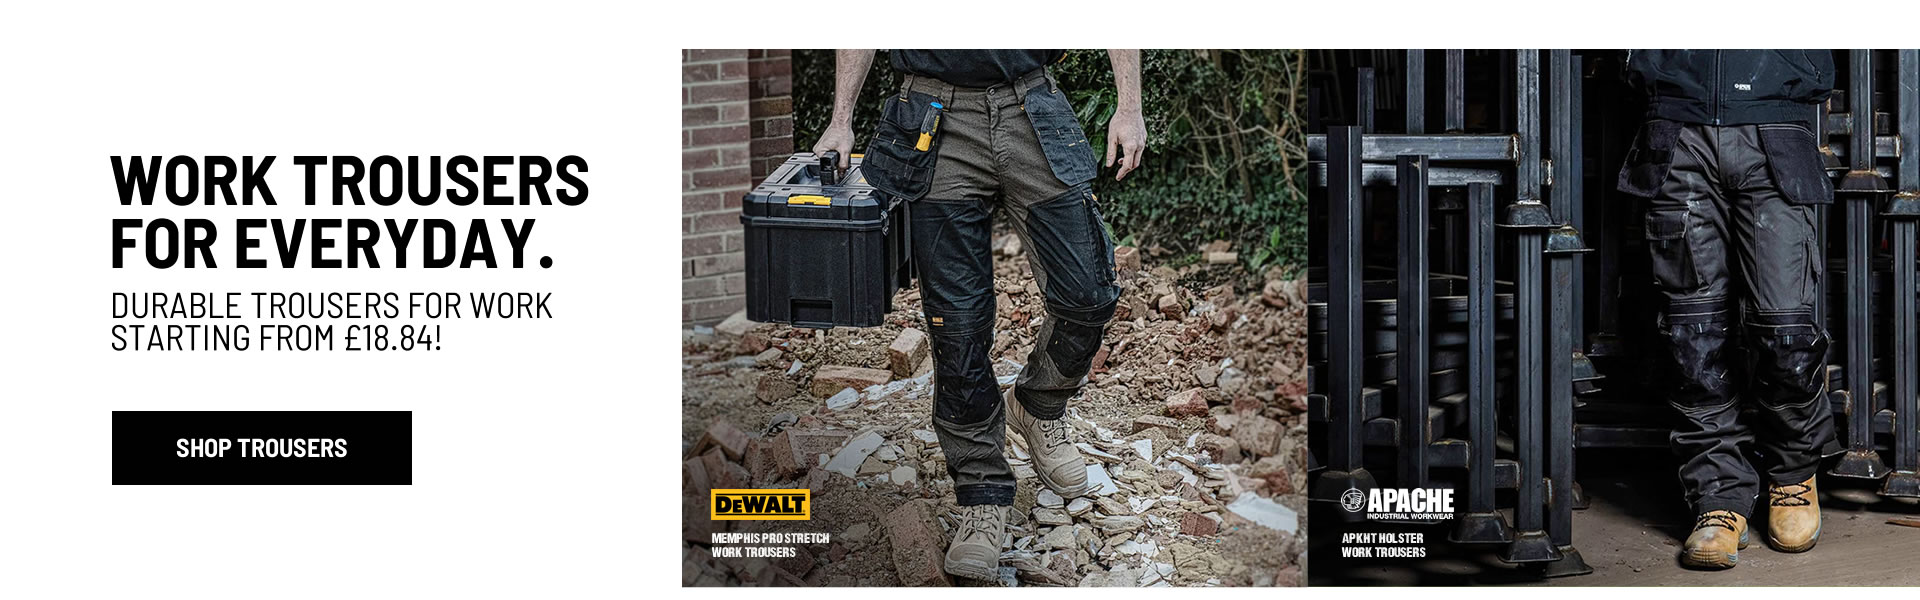 Work trousers starting from £18.84!